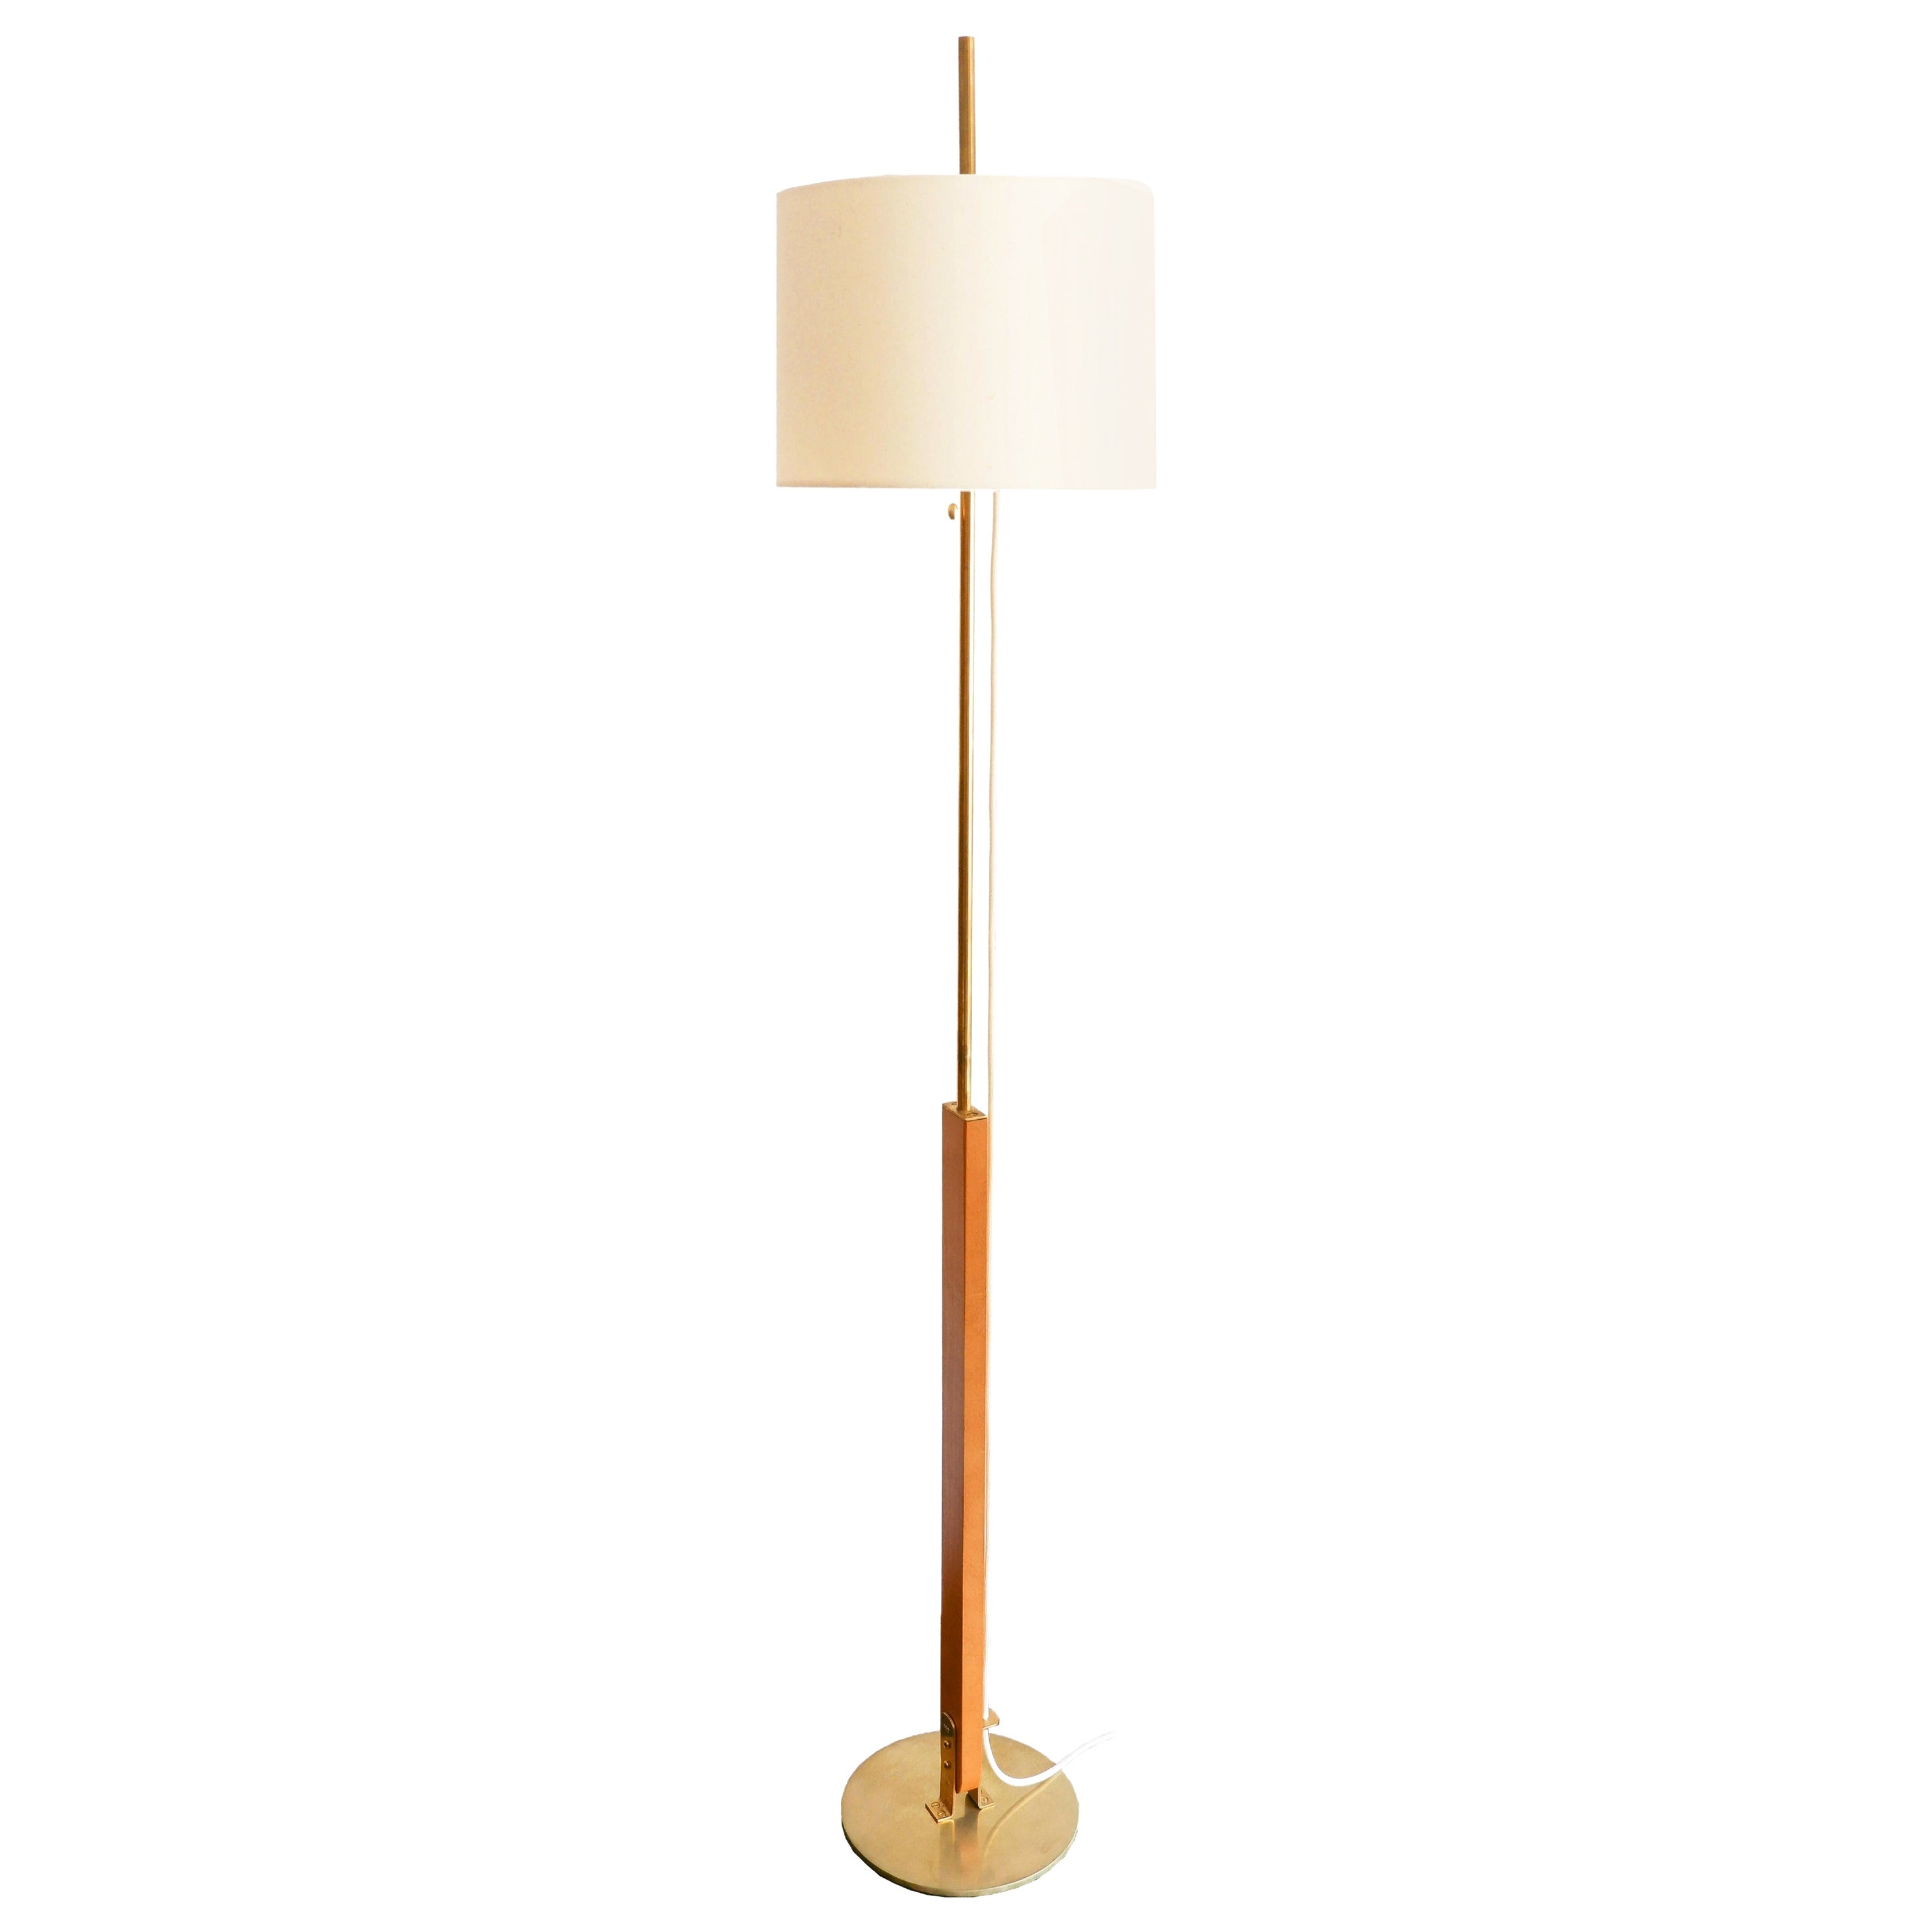 Contemporary, Handmade Floor Lamp, Wood, Brass, Fabric, Mediterranean Objects -A For Sale